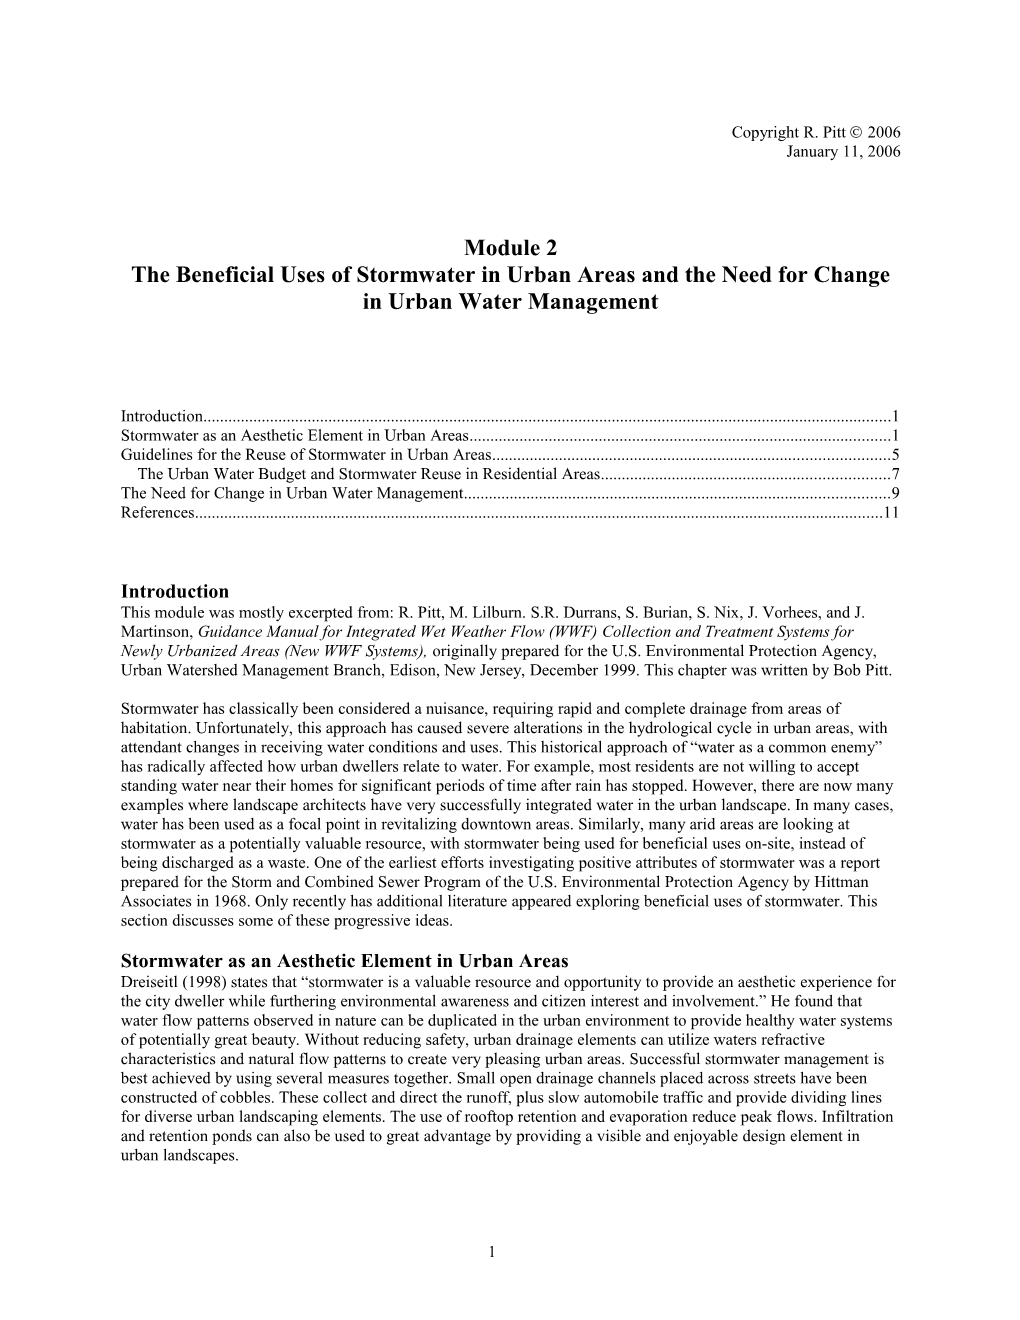 Stormwater Quality Management